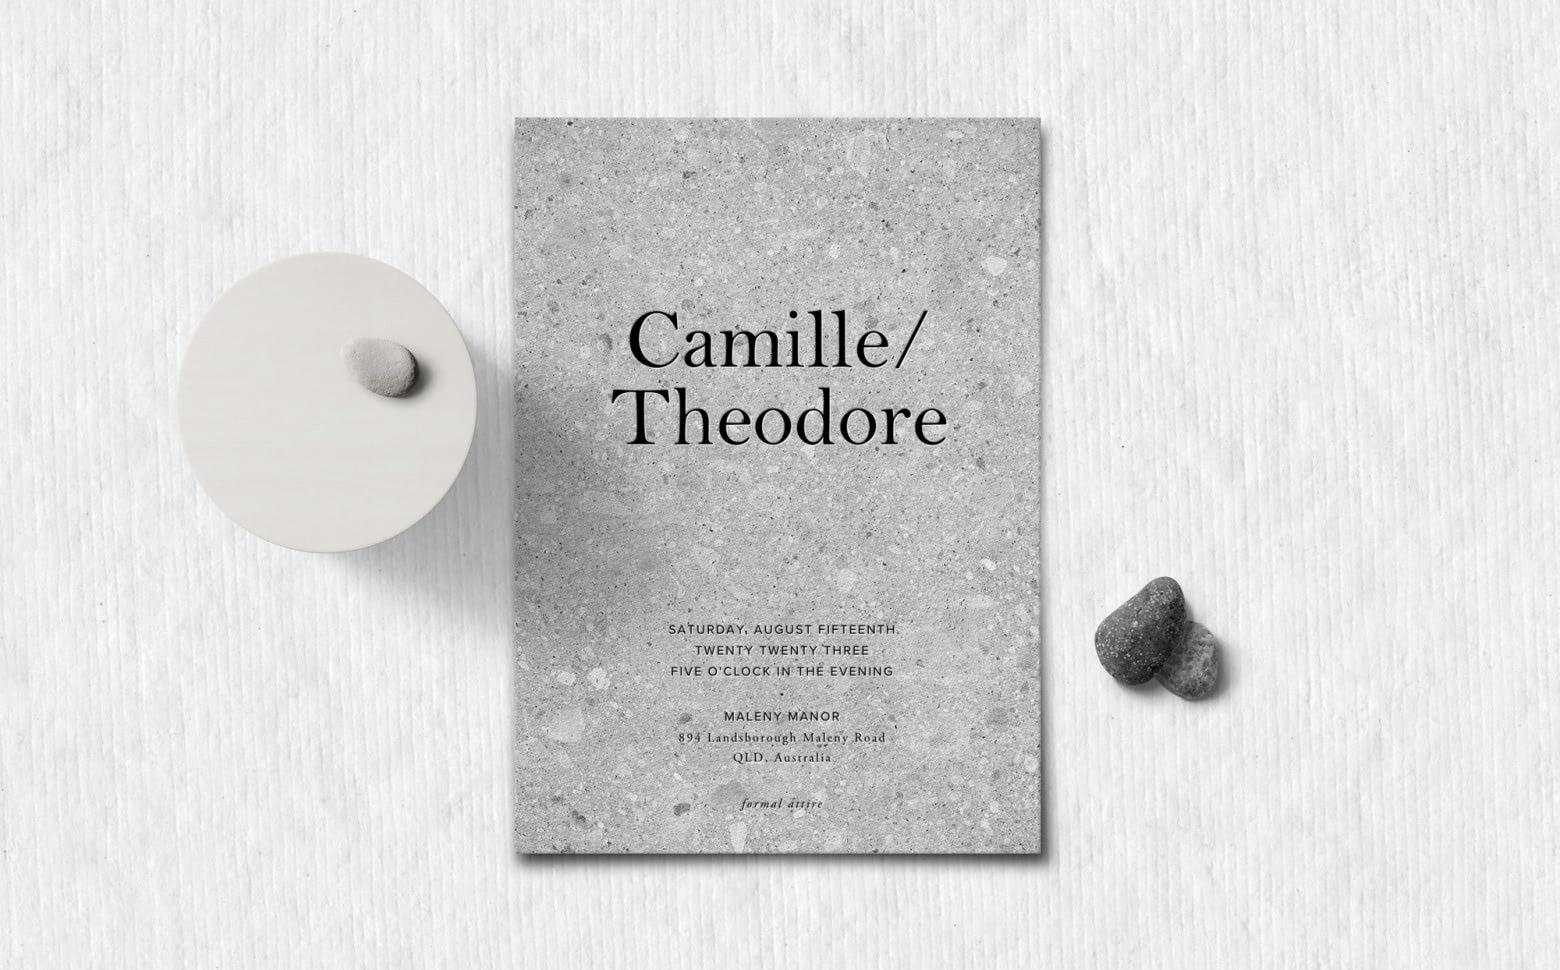 An overhead view of a gray wedding invitation for a couple named Camille and Theodore